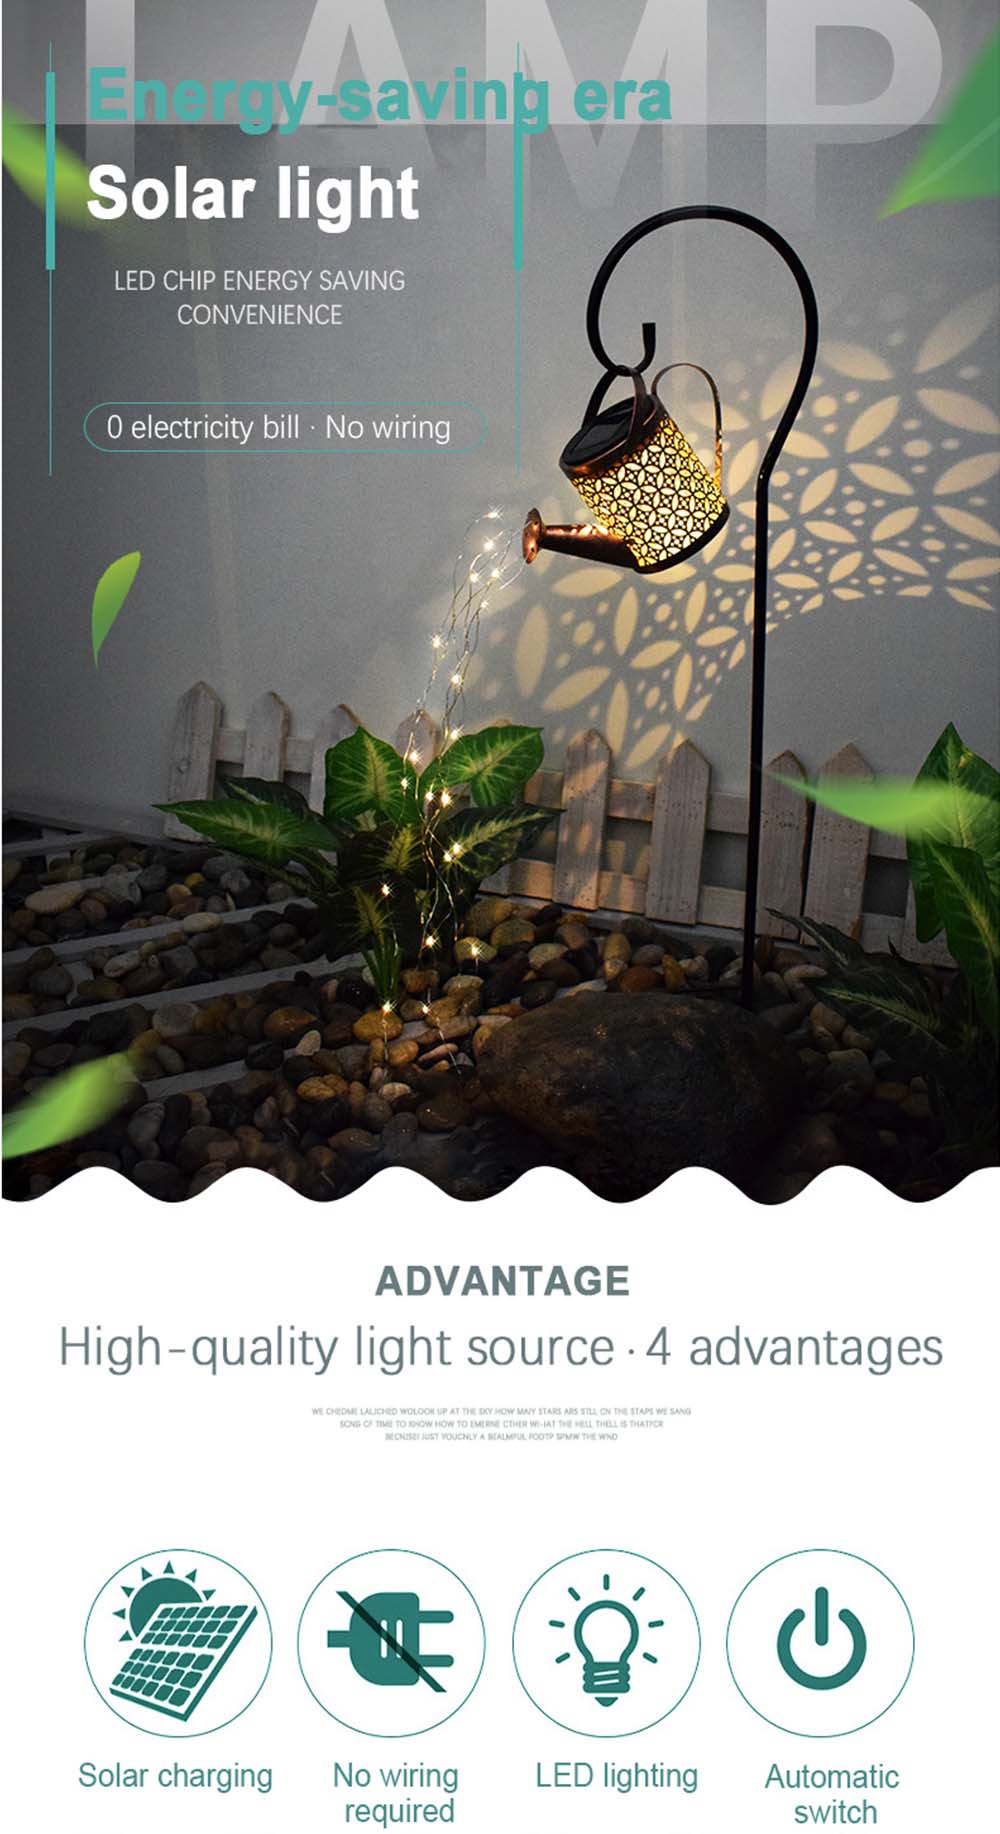 Solar-Light-LED-Solar-Watering-Can-Lamps-Garden-Decoration-Iron-Shower-LED-String-Light-Yard-Lawn-Wa-1940234-2